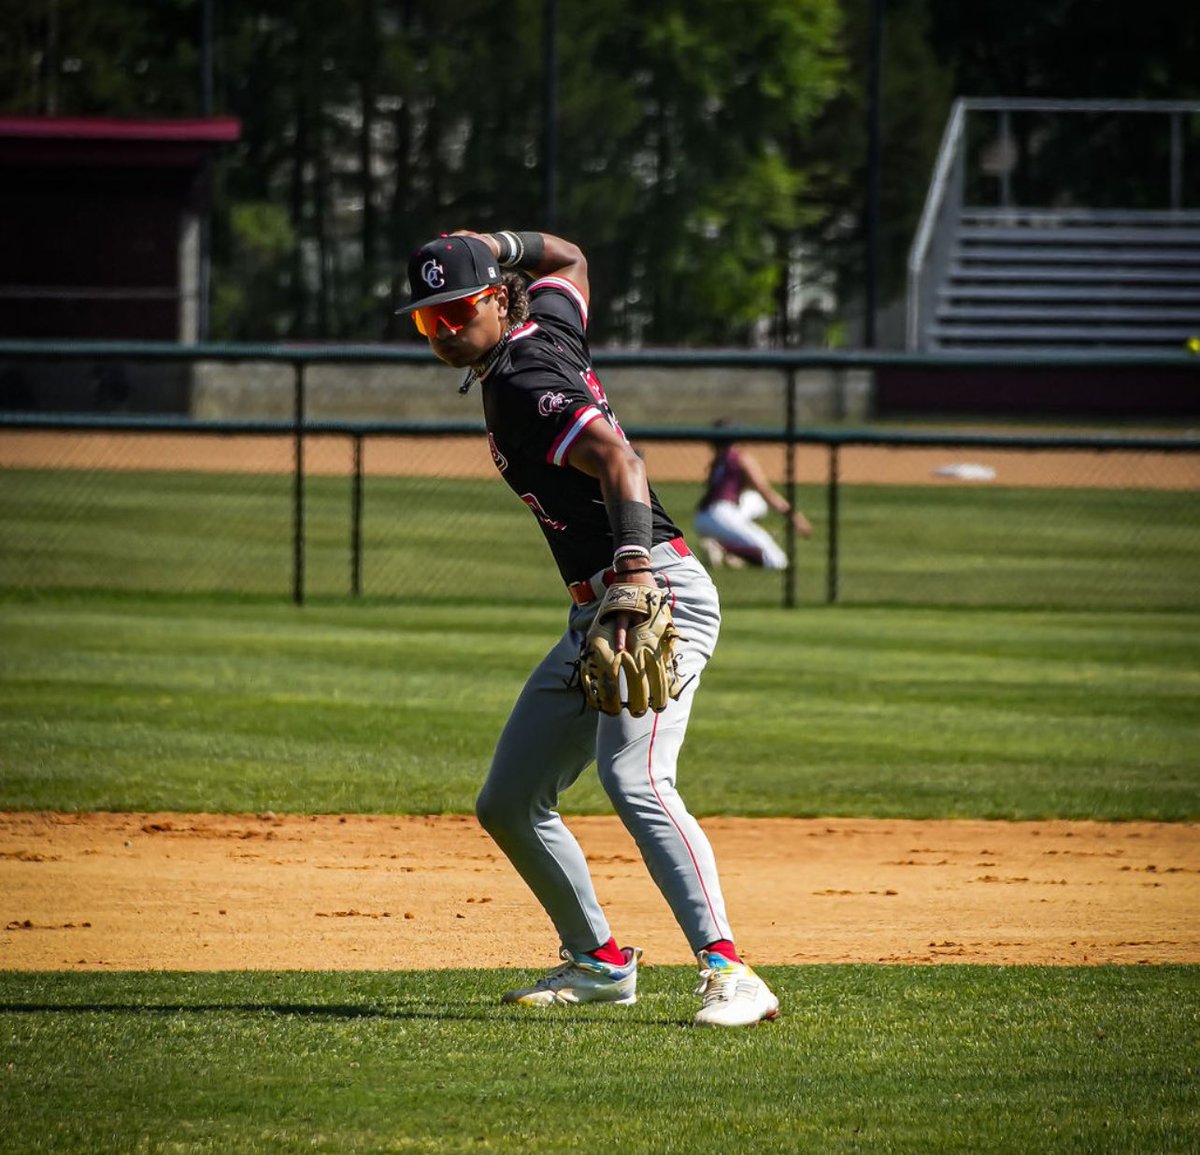 Had a great sophomore season with @GCS_Baseball1 ! Couldn’t ask for a better group of guys to compete with !⚾️ Stats: Avg- .516 OBP- .592 OPS- 1.640 SLG- 1.048 1B- 16 2B- 6 3B- 3 HR- 7 RBI- 26 R- 38 BB-11 @LoweryDevon @E_mauldin11 @JamieSummerlin7 @MattyHams @Bbrew4 @32JonnyA